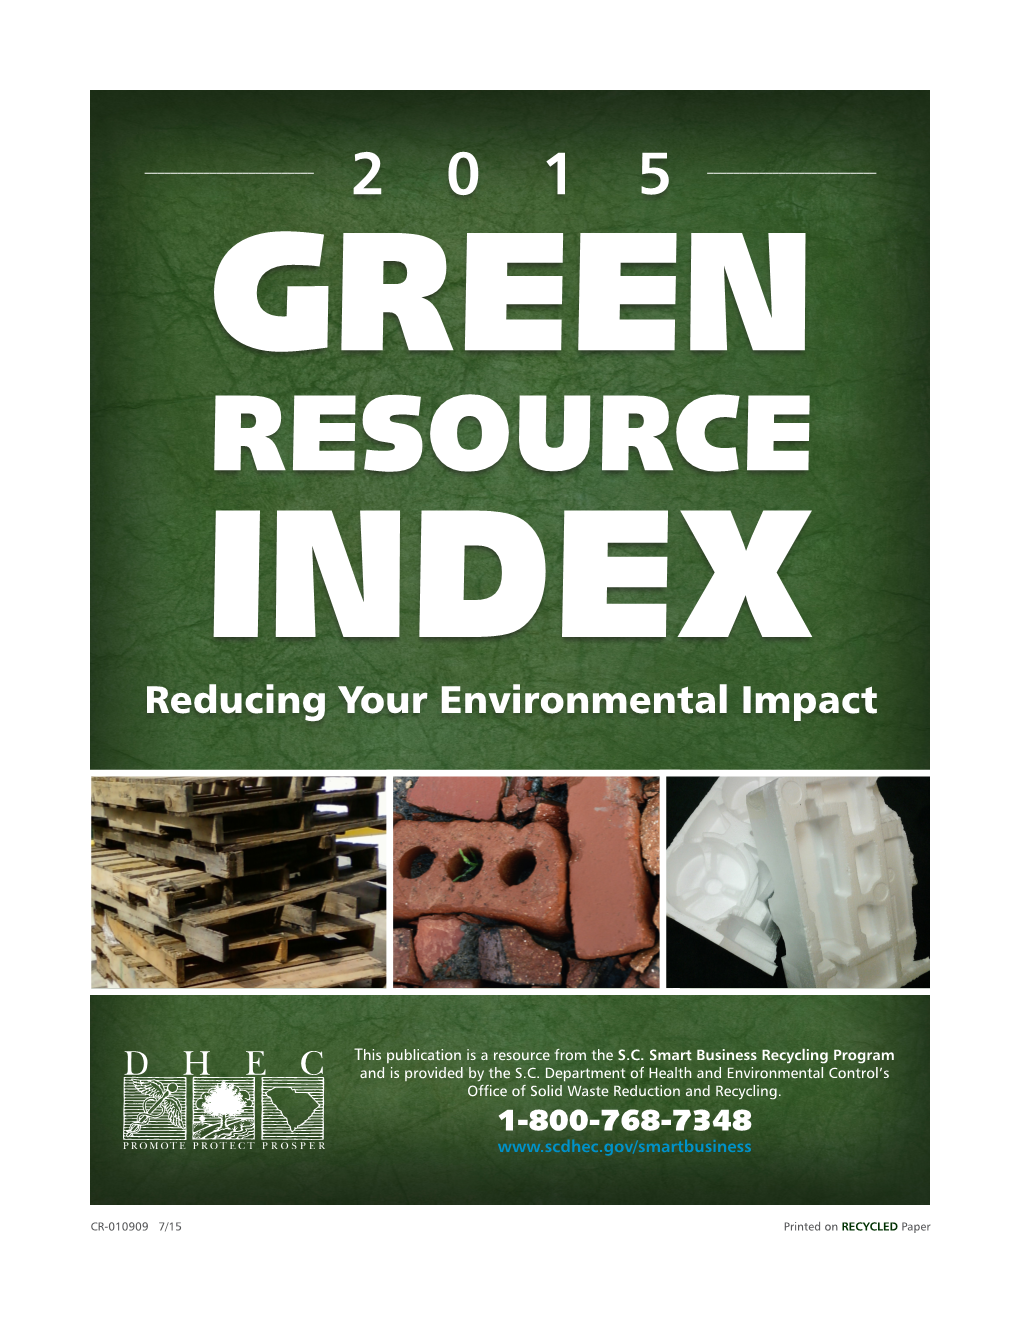 GREEN RESOURCE INDEX Reducing Your Environmental Impact